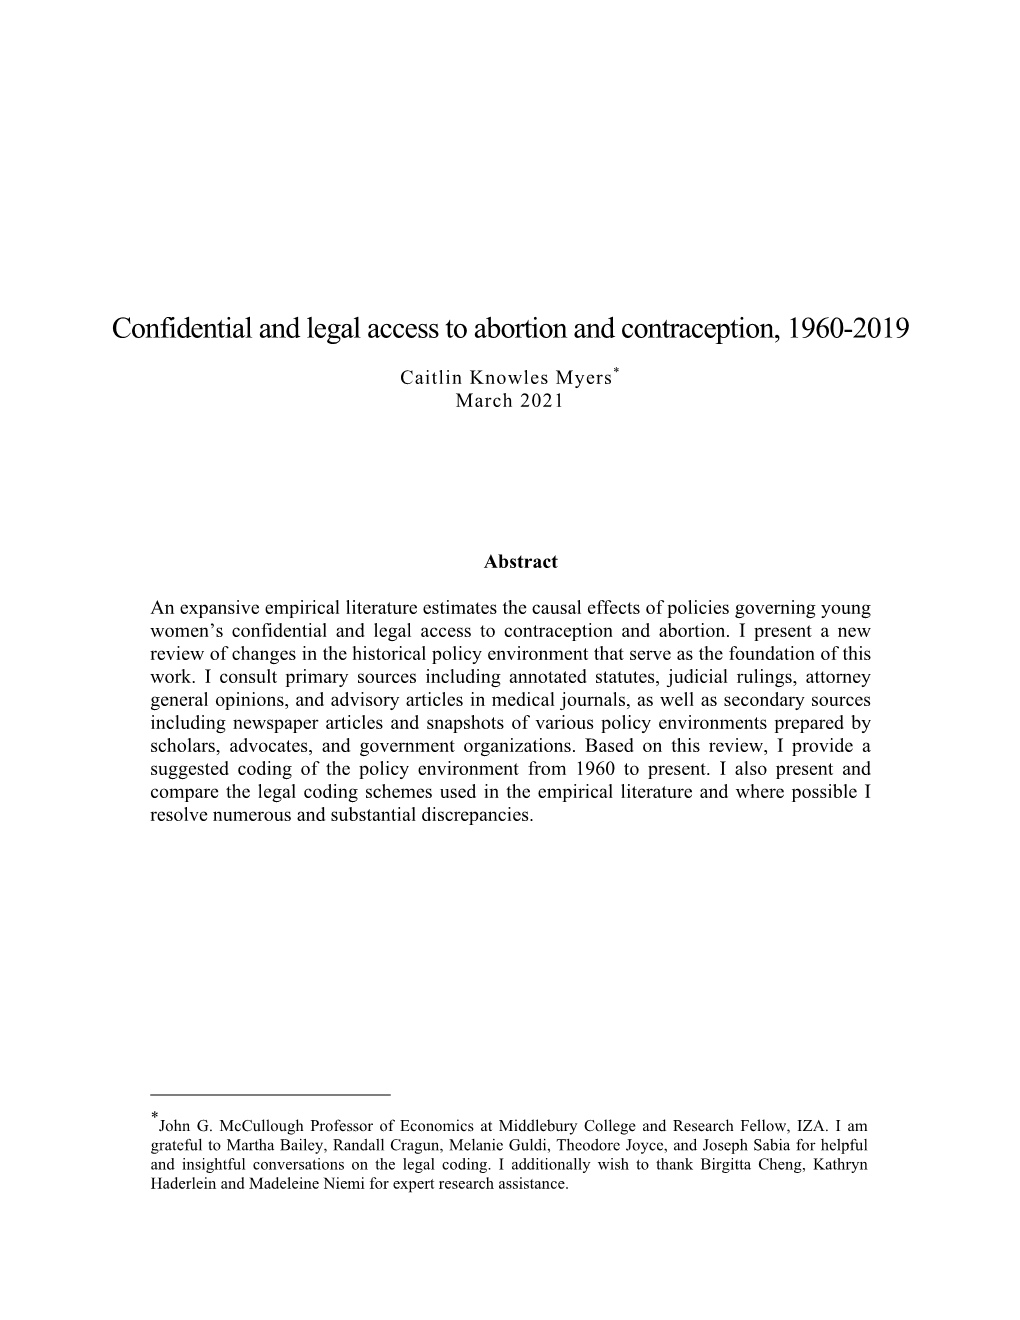 Confidential and Legal Access to Abortion and Contraception, 1960-2019